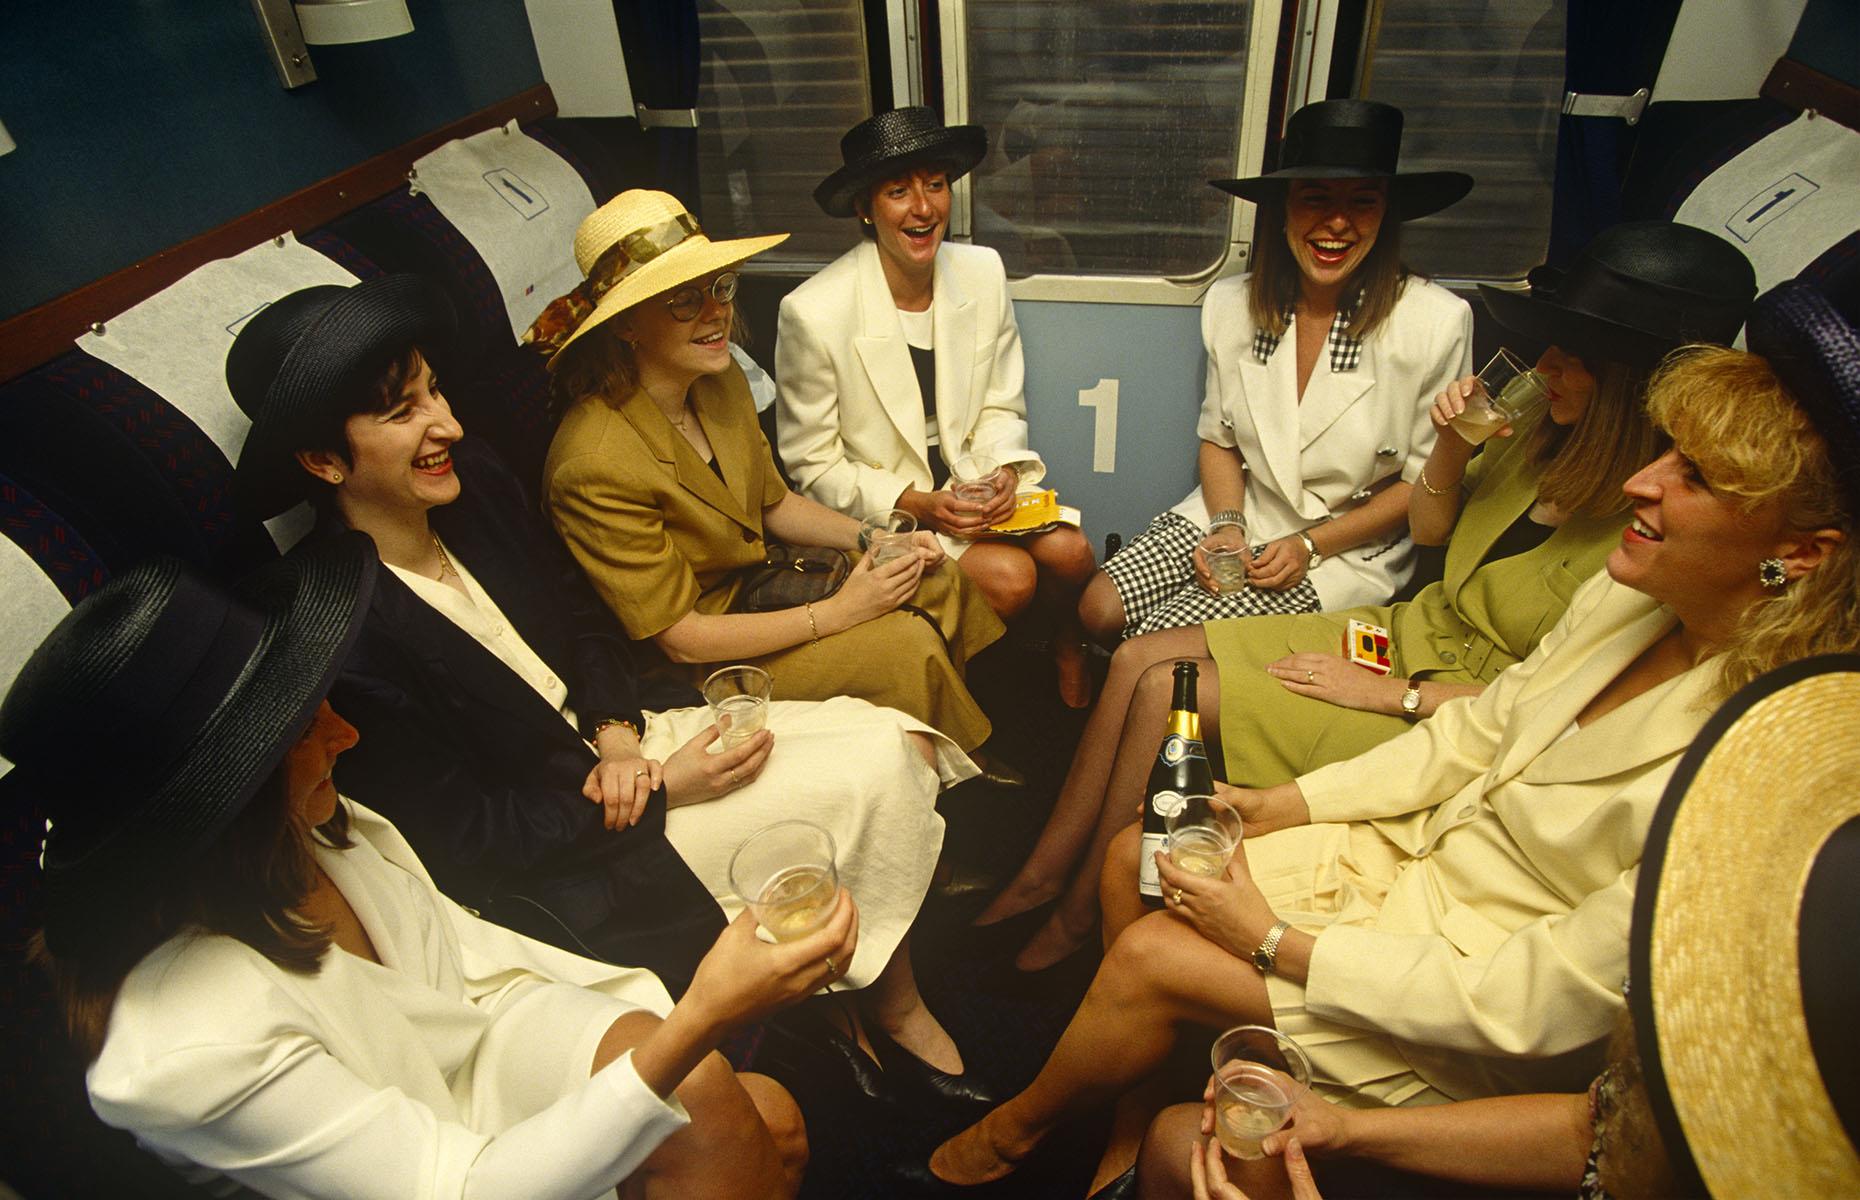 Throughout the ages trains have played a significant part in people's lives. While private car ownership has steadily risen since the 1980s, trains are still often a significant part of special occasions like this one. Here, captured in 1993, a group of women are travelling from London Waterloo to Royal Ascot in Berkshire for Ladies Day during the Royal Ascot racing week.